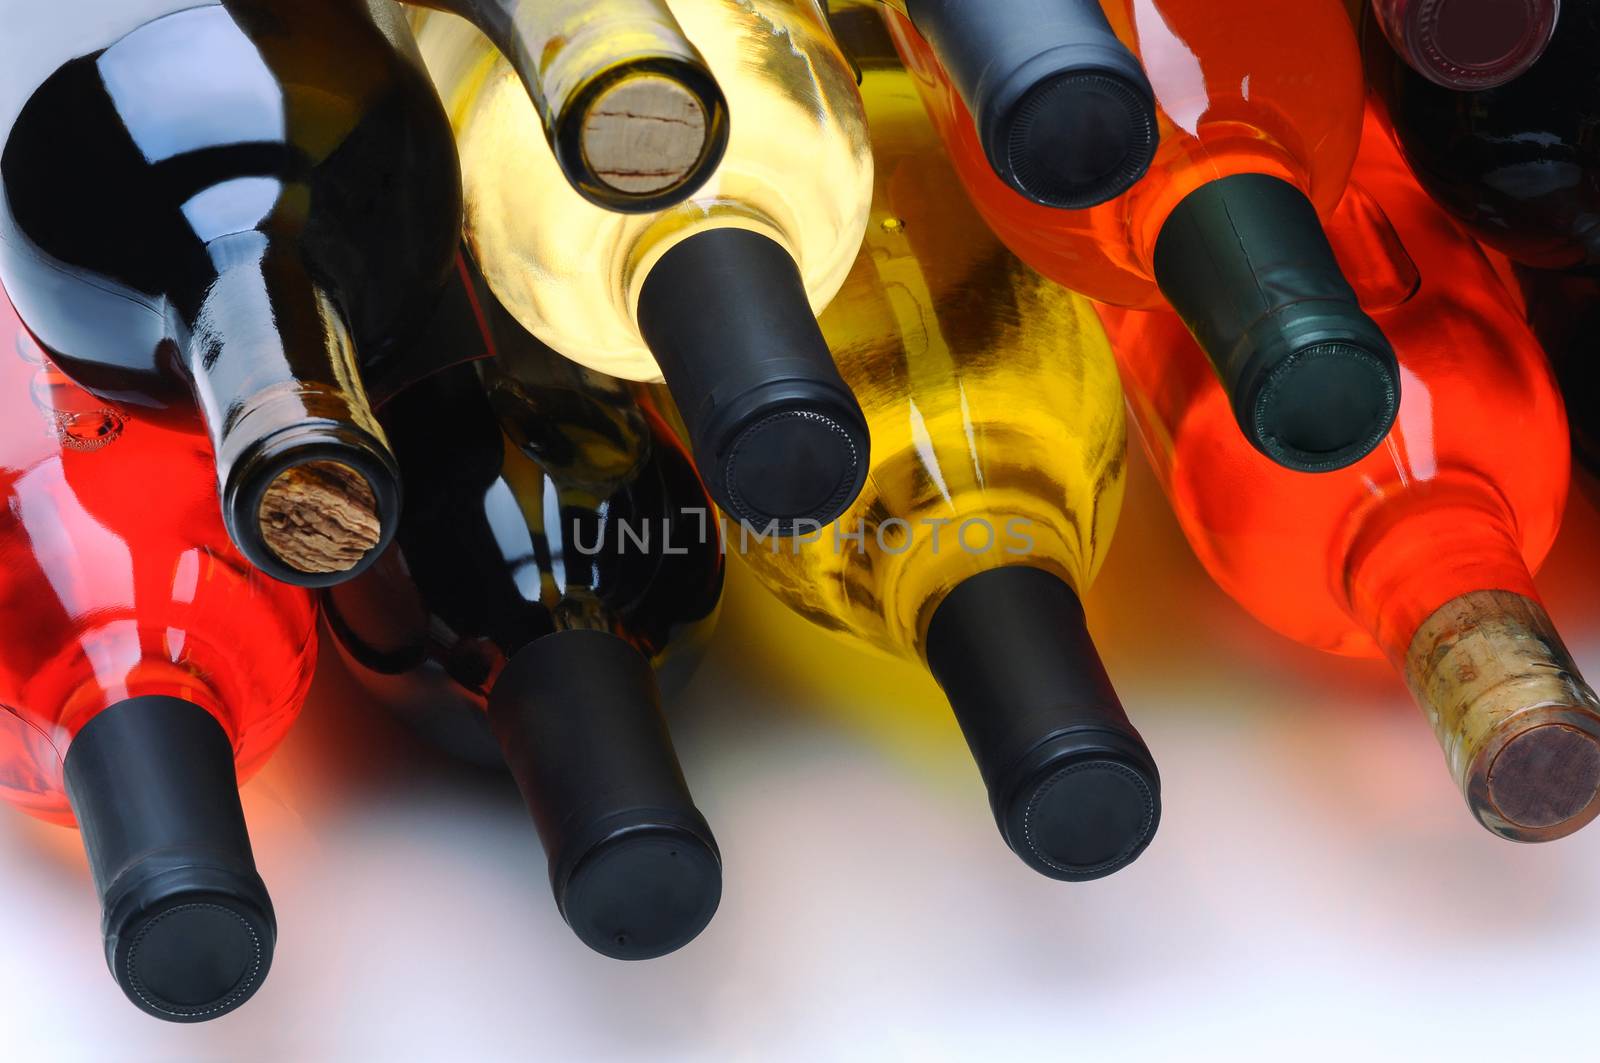 Assorted wine bottles on their side by sCukrov